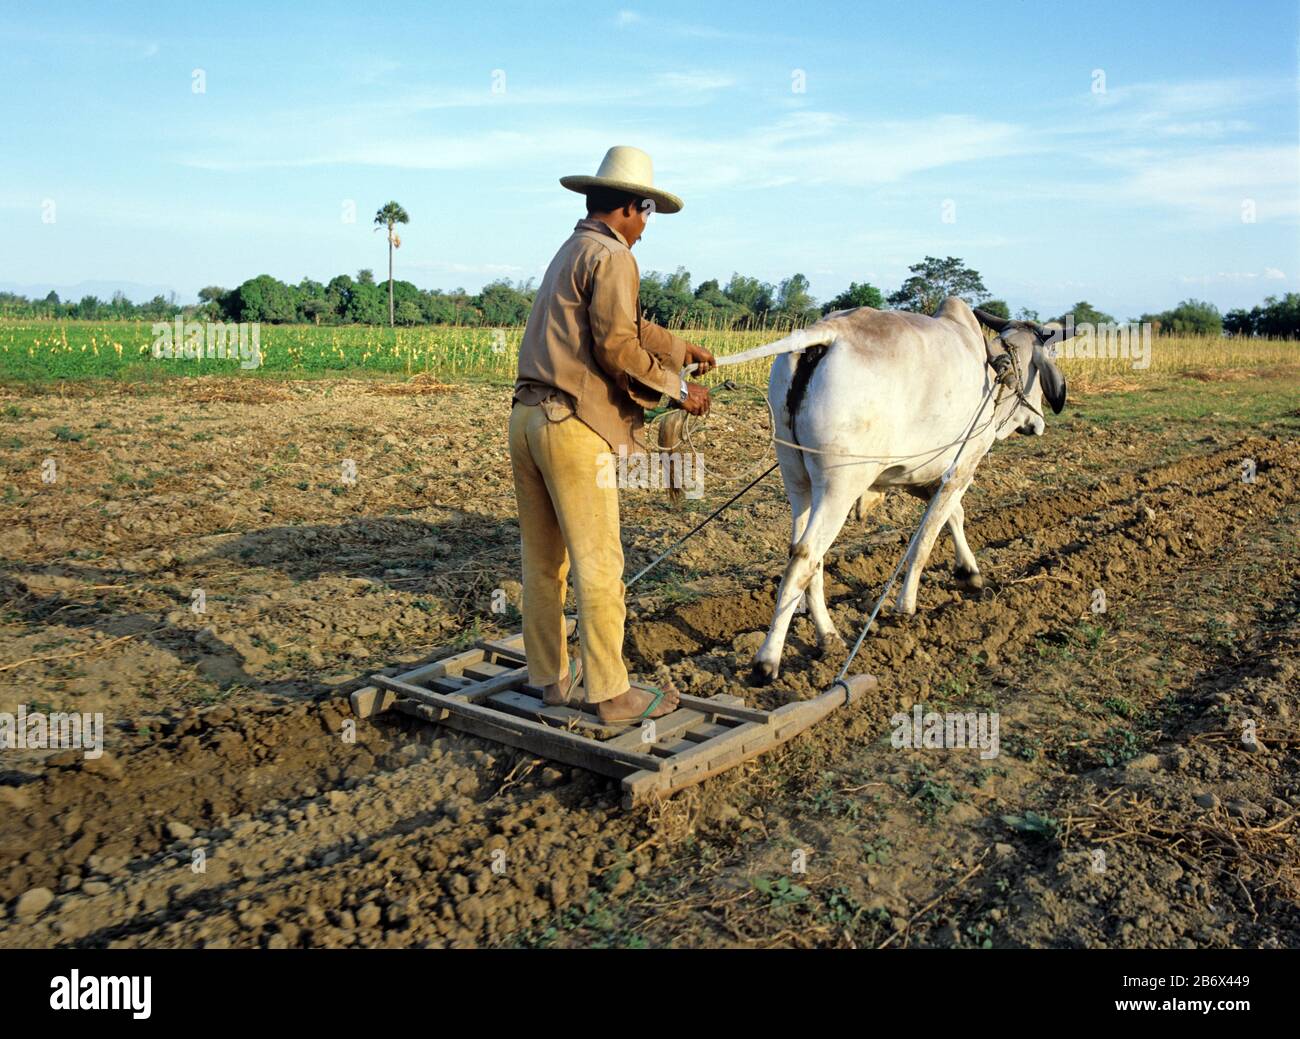 Filipino farmer harrowing and breaking up ploughed field by standing on a small press behind a zebu ox, Luzon, Philippines, February Stock Photo